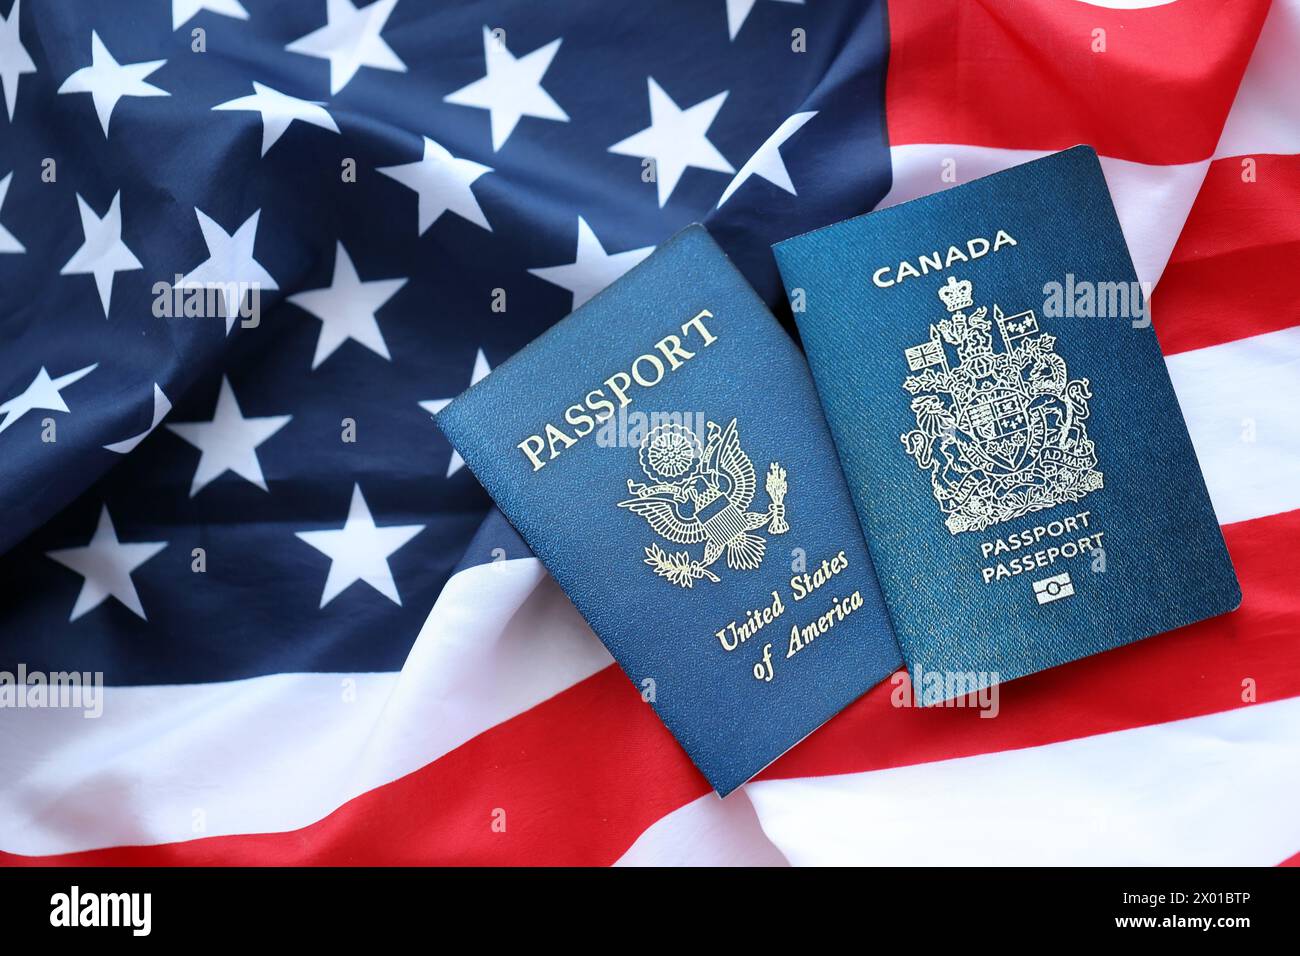 Passport of Canada with US Passport on United States of America folded flag close up Stock Photo